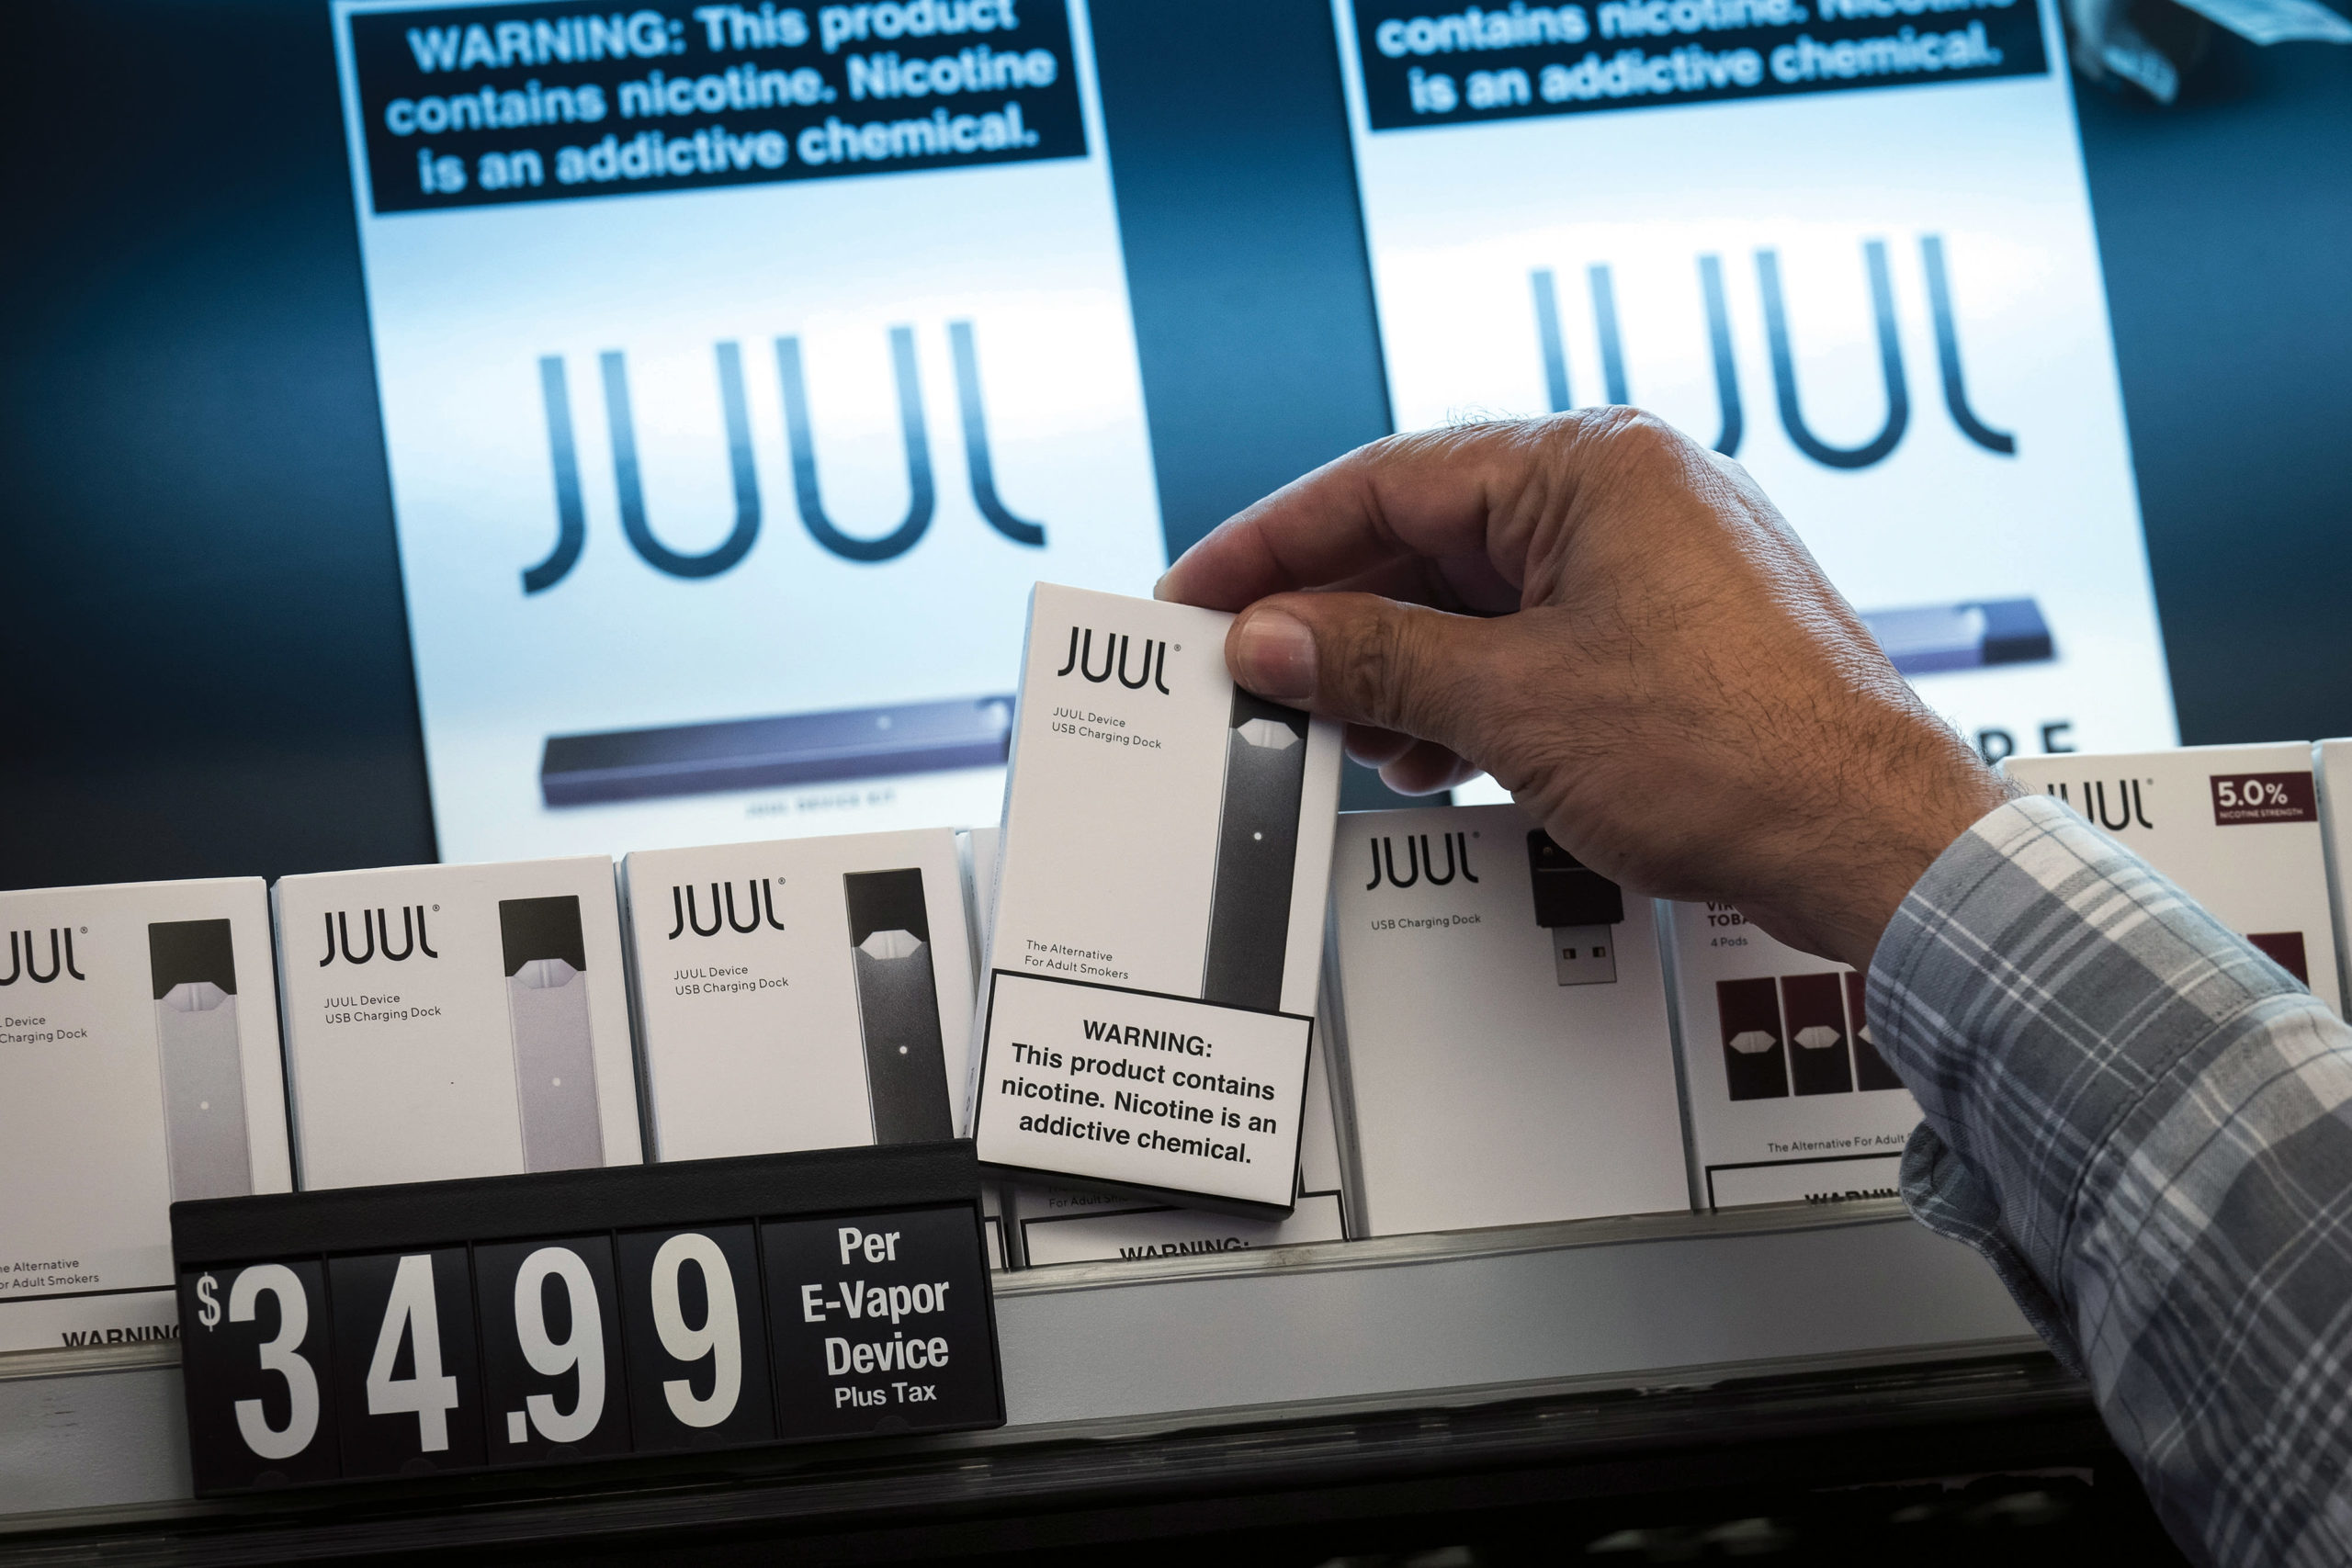 The Trump administration will ban flavored e-cigarette pods, with exceptions for menthol and tobacco